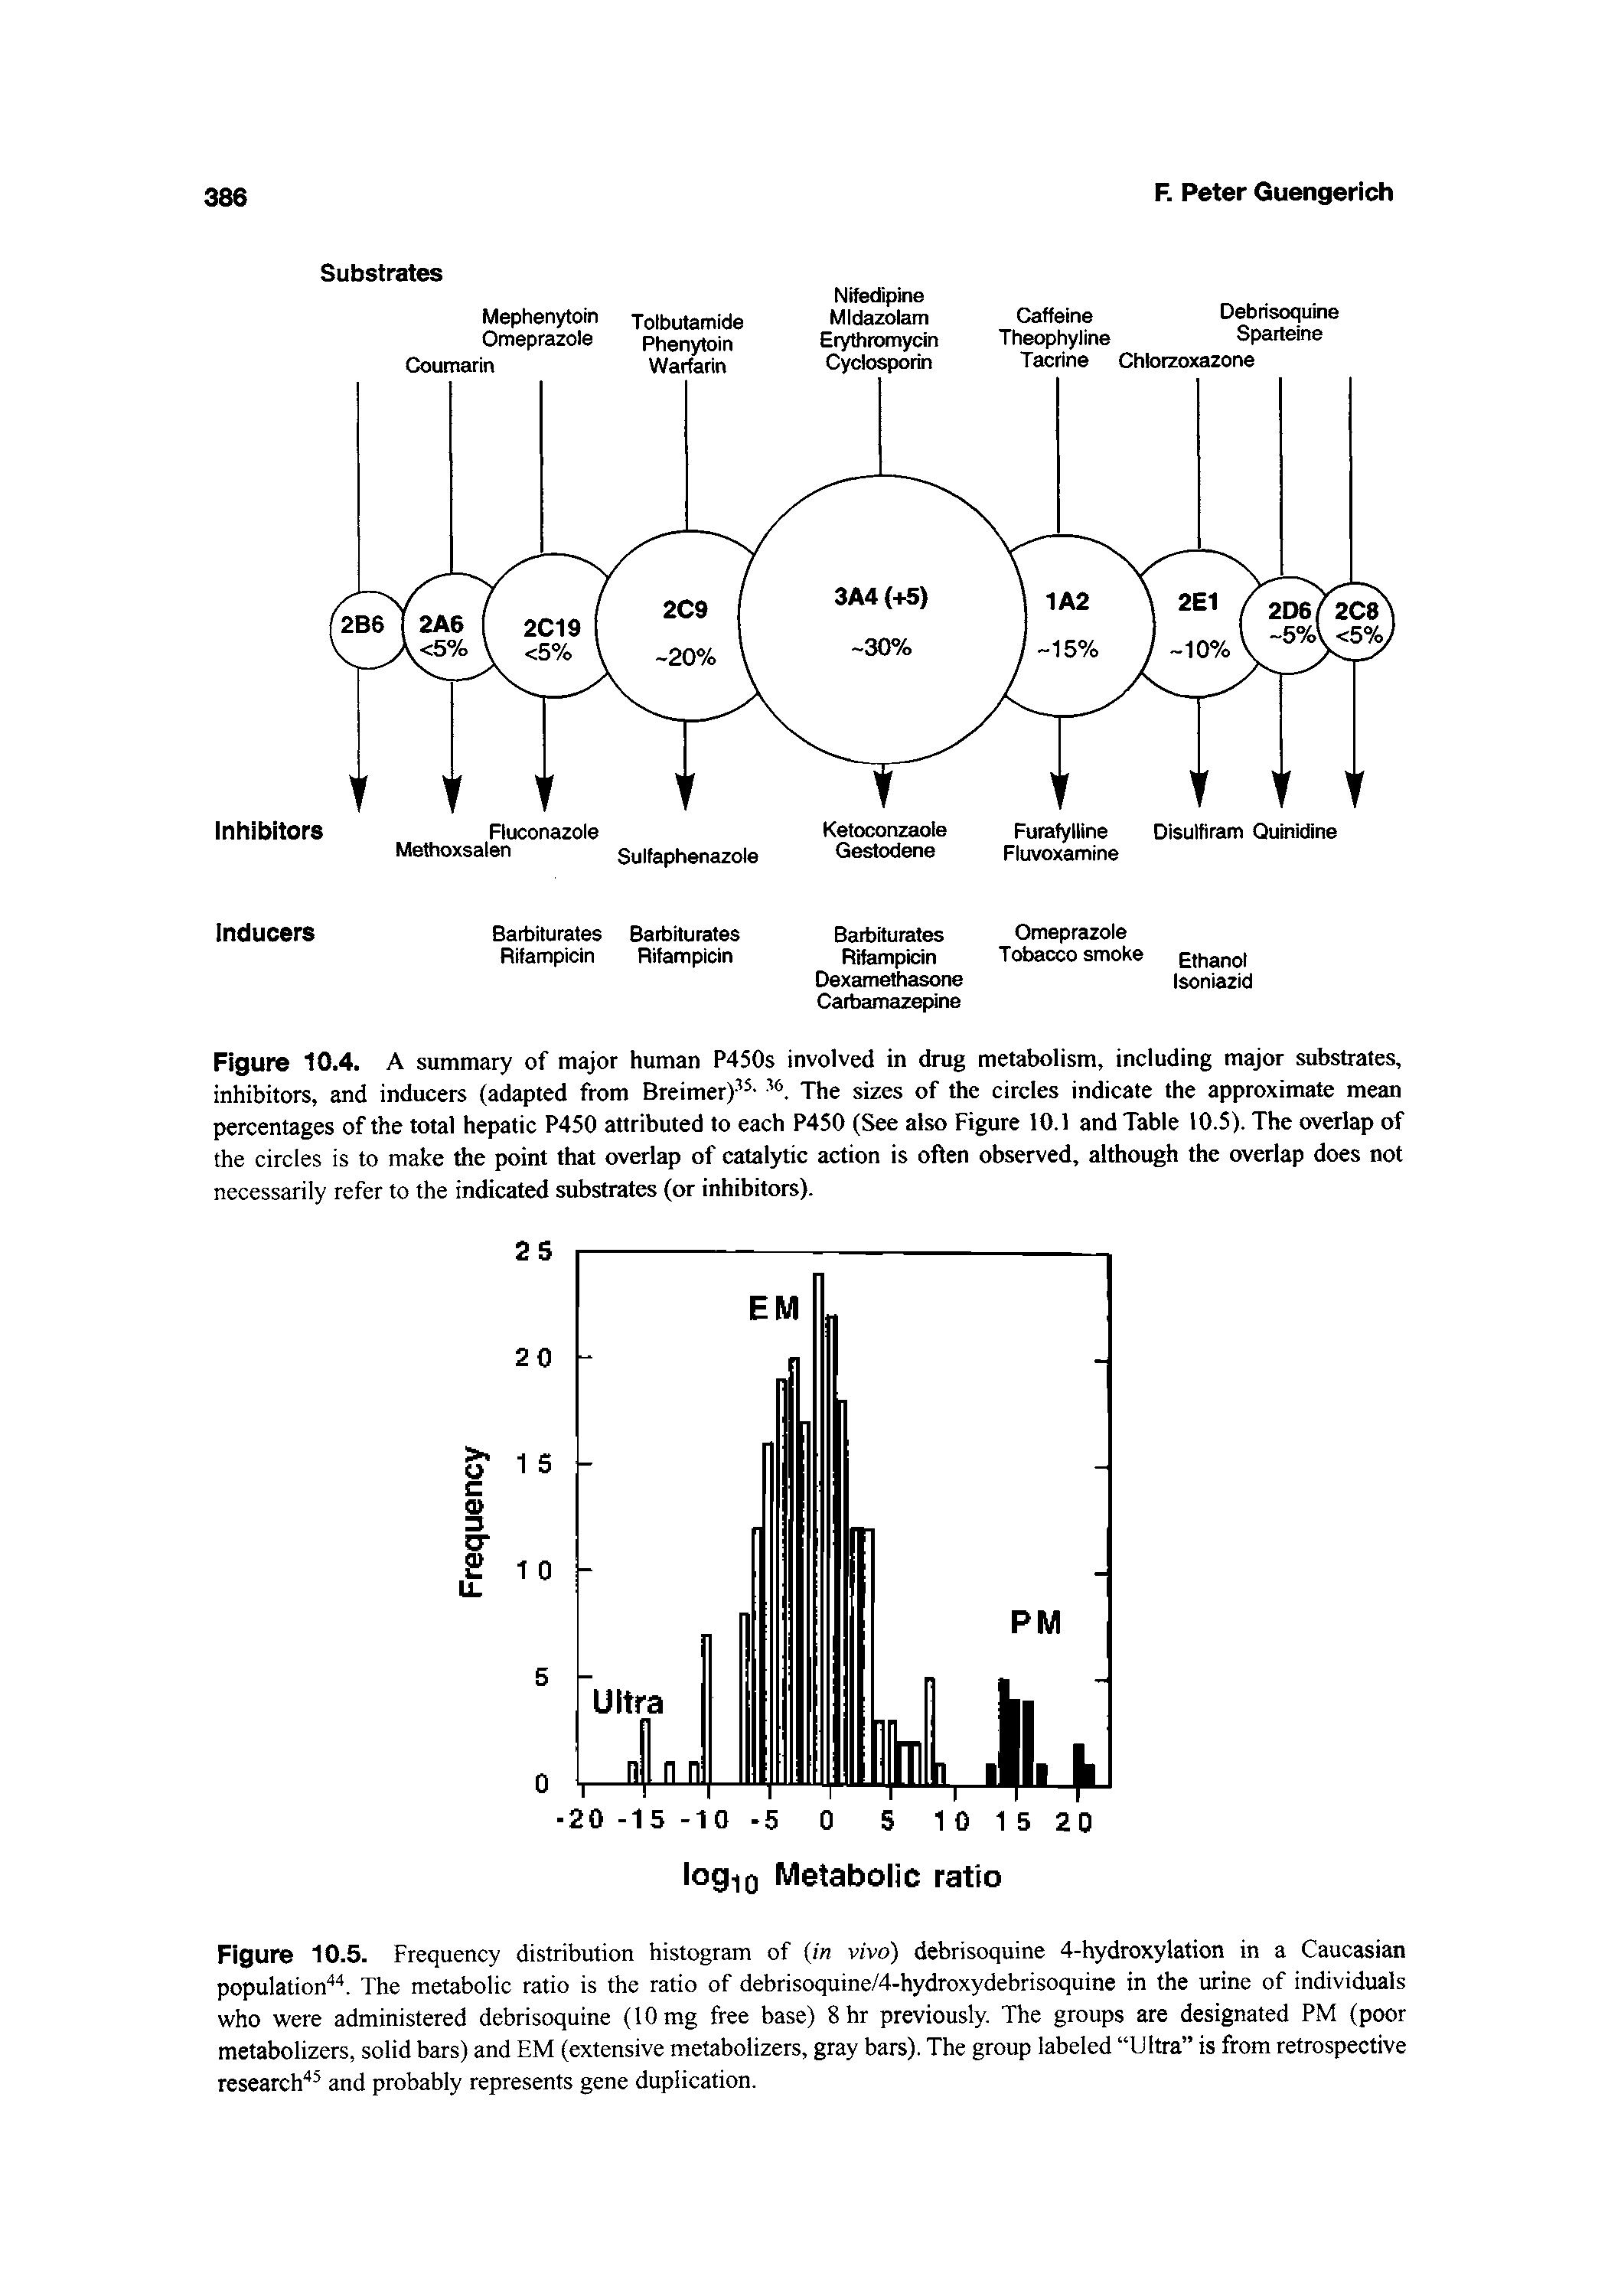 Figure 10.4. A summary of major human P450s involved in drug metabolism, including major substrates, inhibitors, and inducers (adapted from Breimer) - The sizes of the circles indicate the approximate mean percentages of the total hepatic P450 attributed to each P450 (See also Figure 10.1 and Table 10.5). The overlap of the circles is to make the point that overlap of catalytic action is often observed, although the overlap does not necessarily refer to the indicated substrates (or inhibitors).